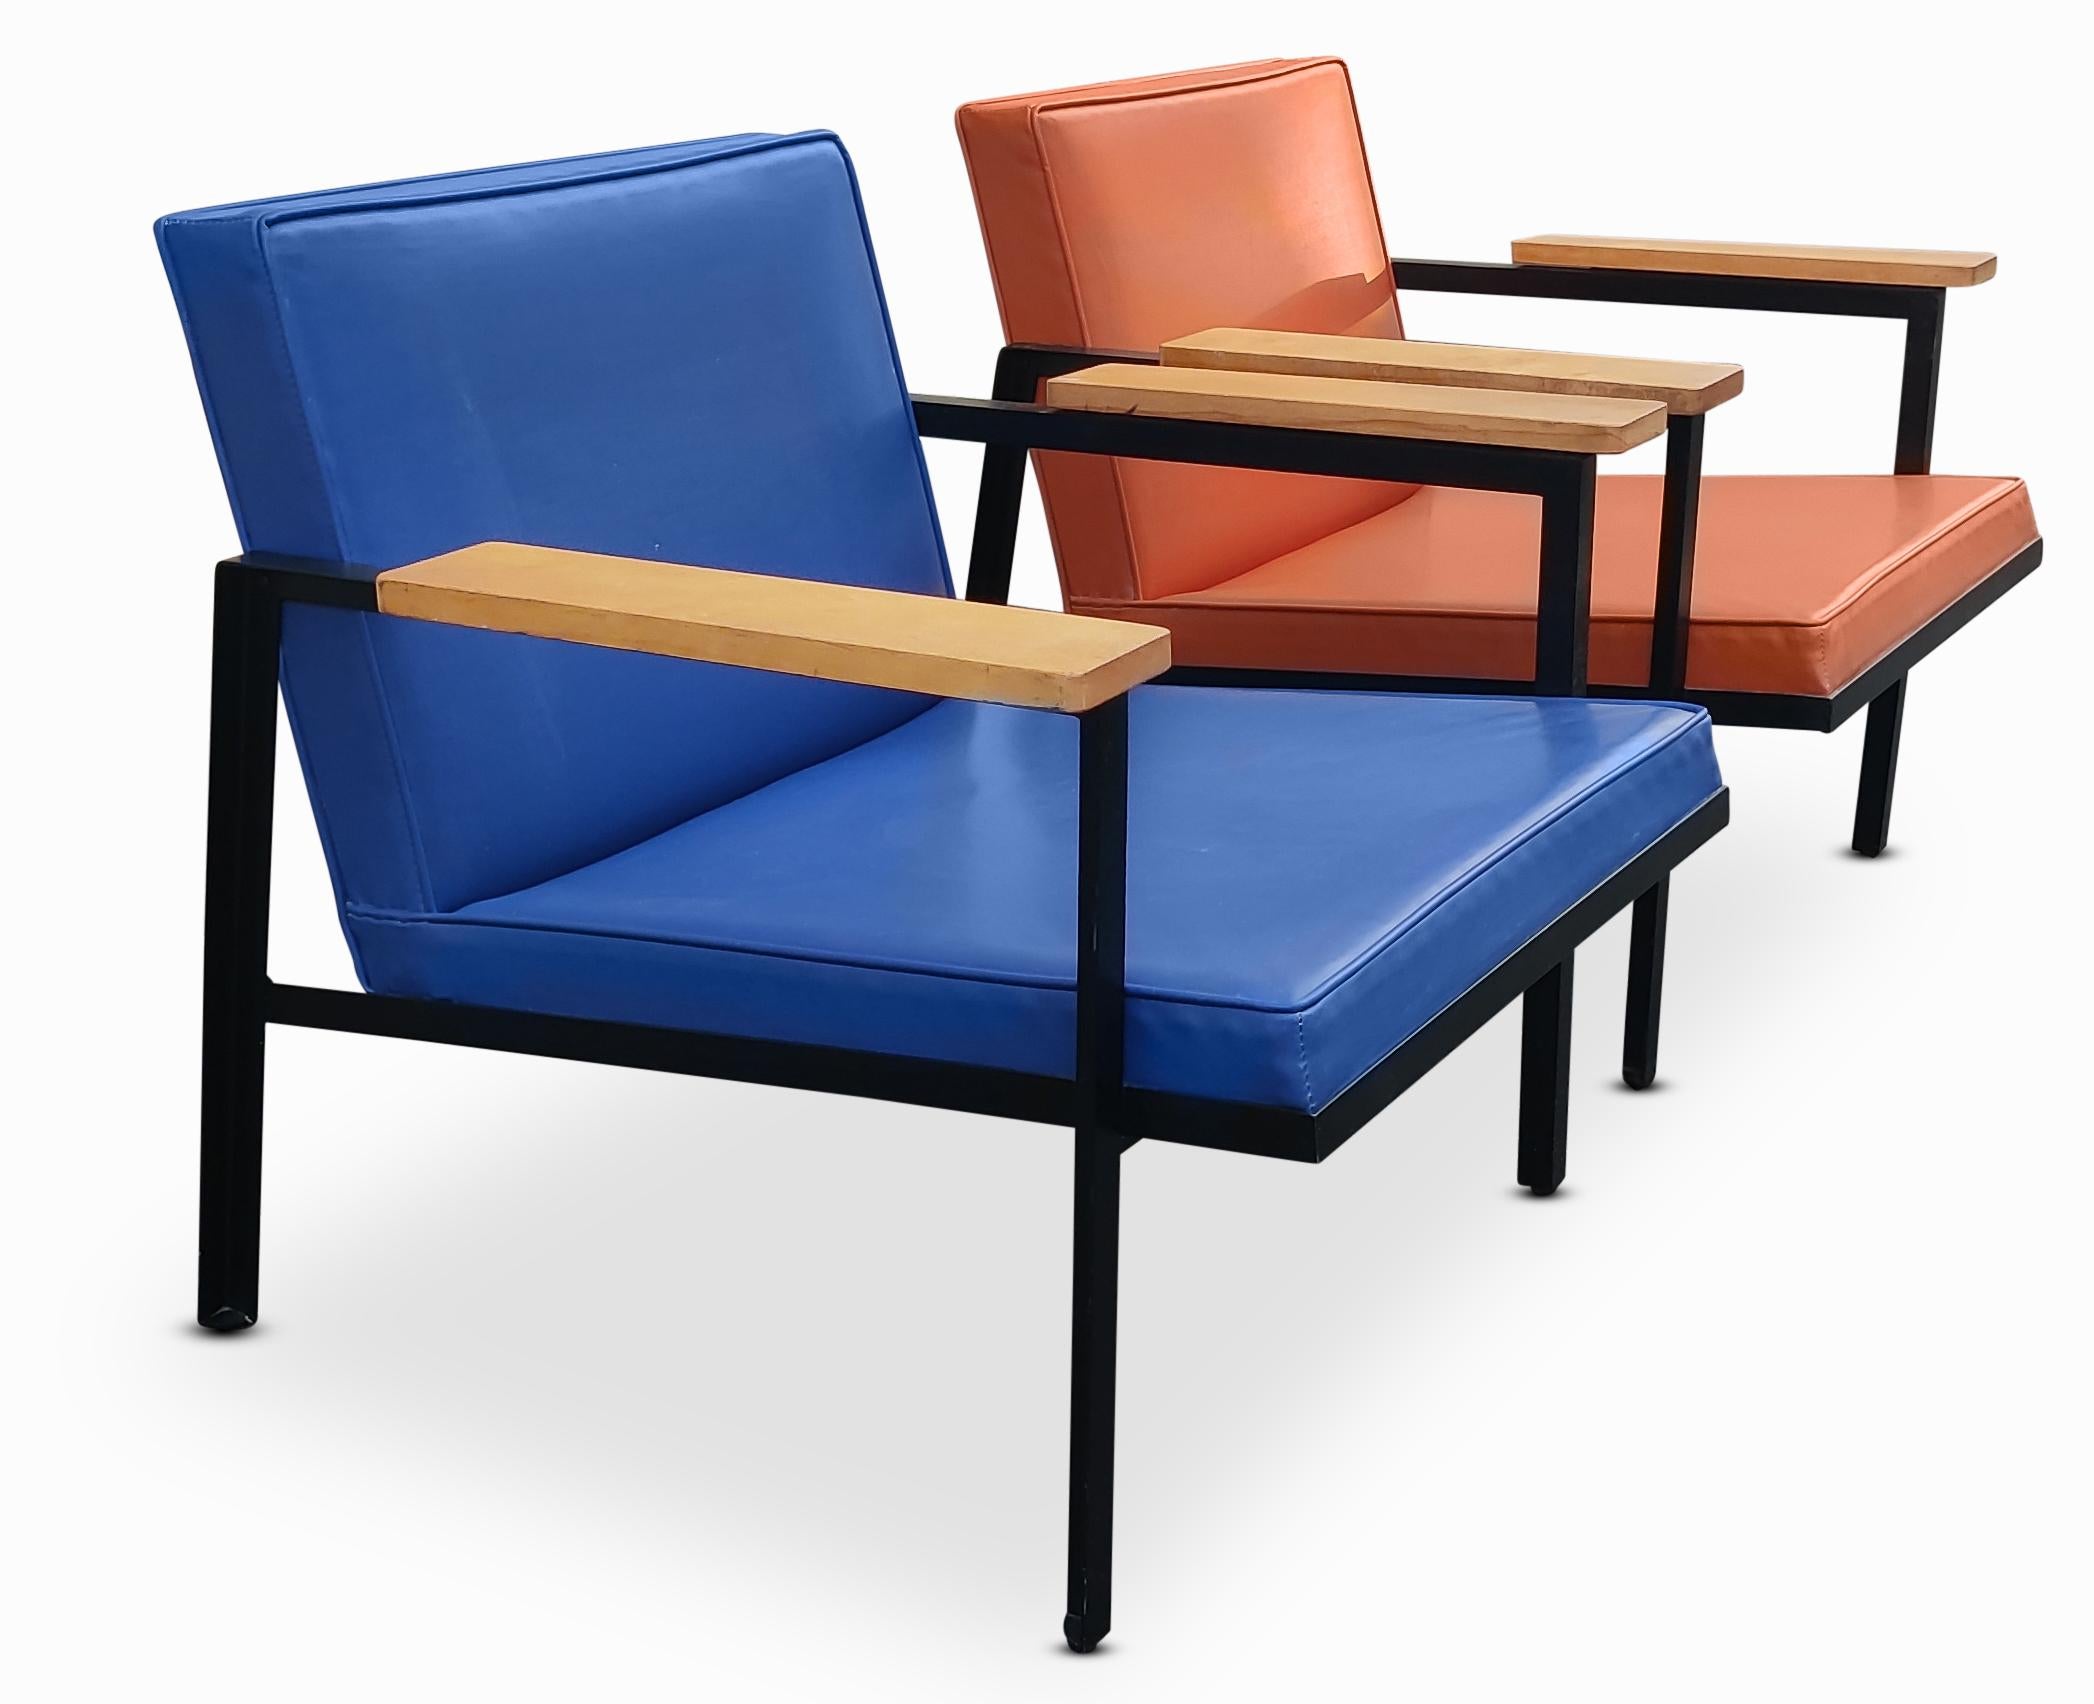 Super rare! George Nelson for Herman Miller steel frame chairs, model 5080 Easy Lounge Chairs. Original painted frames with solid wood arms. Original blue and orange vinyl upholstery. Vinyl is soft and pliable, minor blemishes on each. Padding is